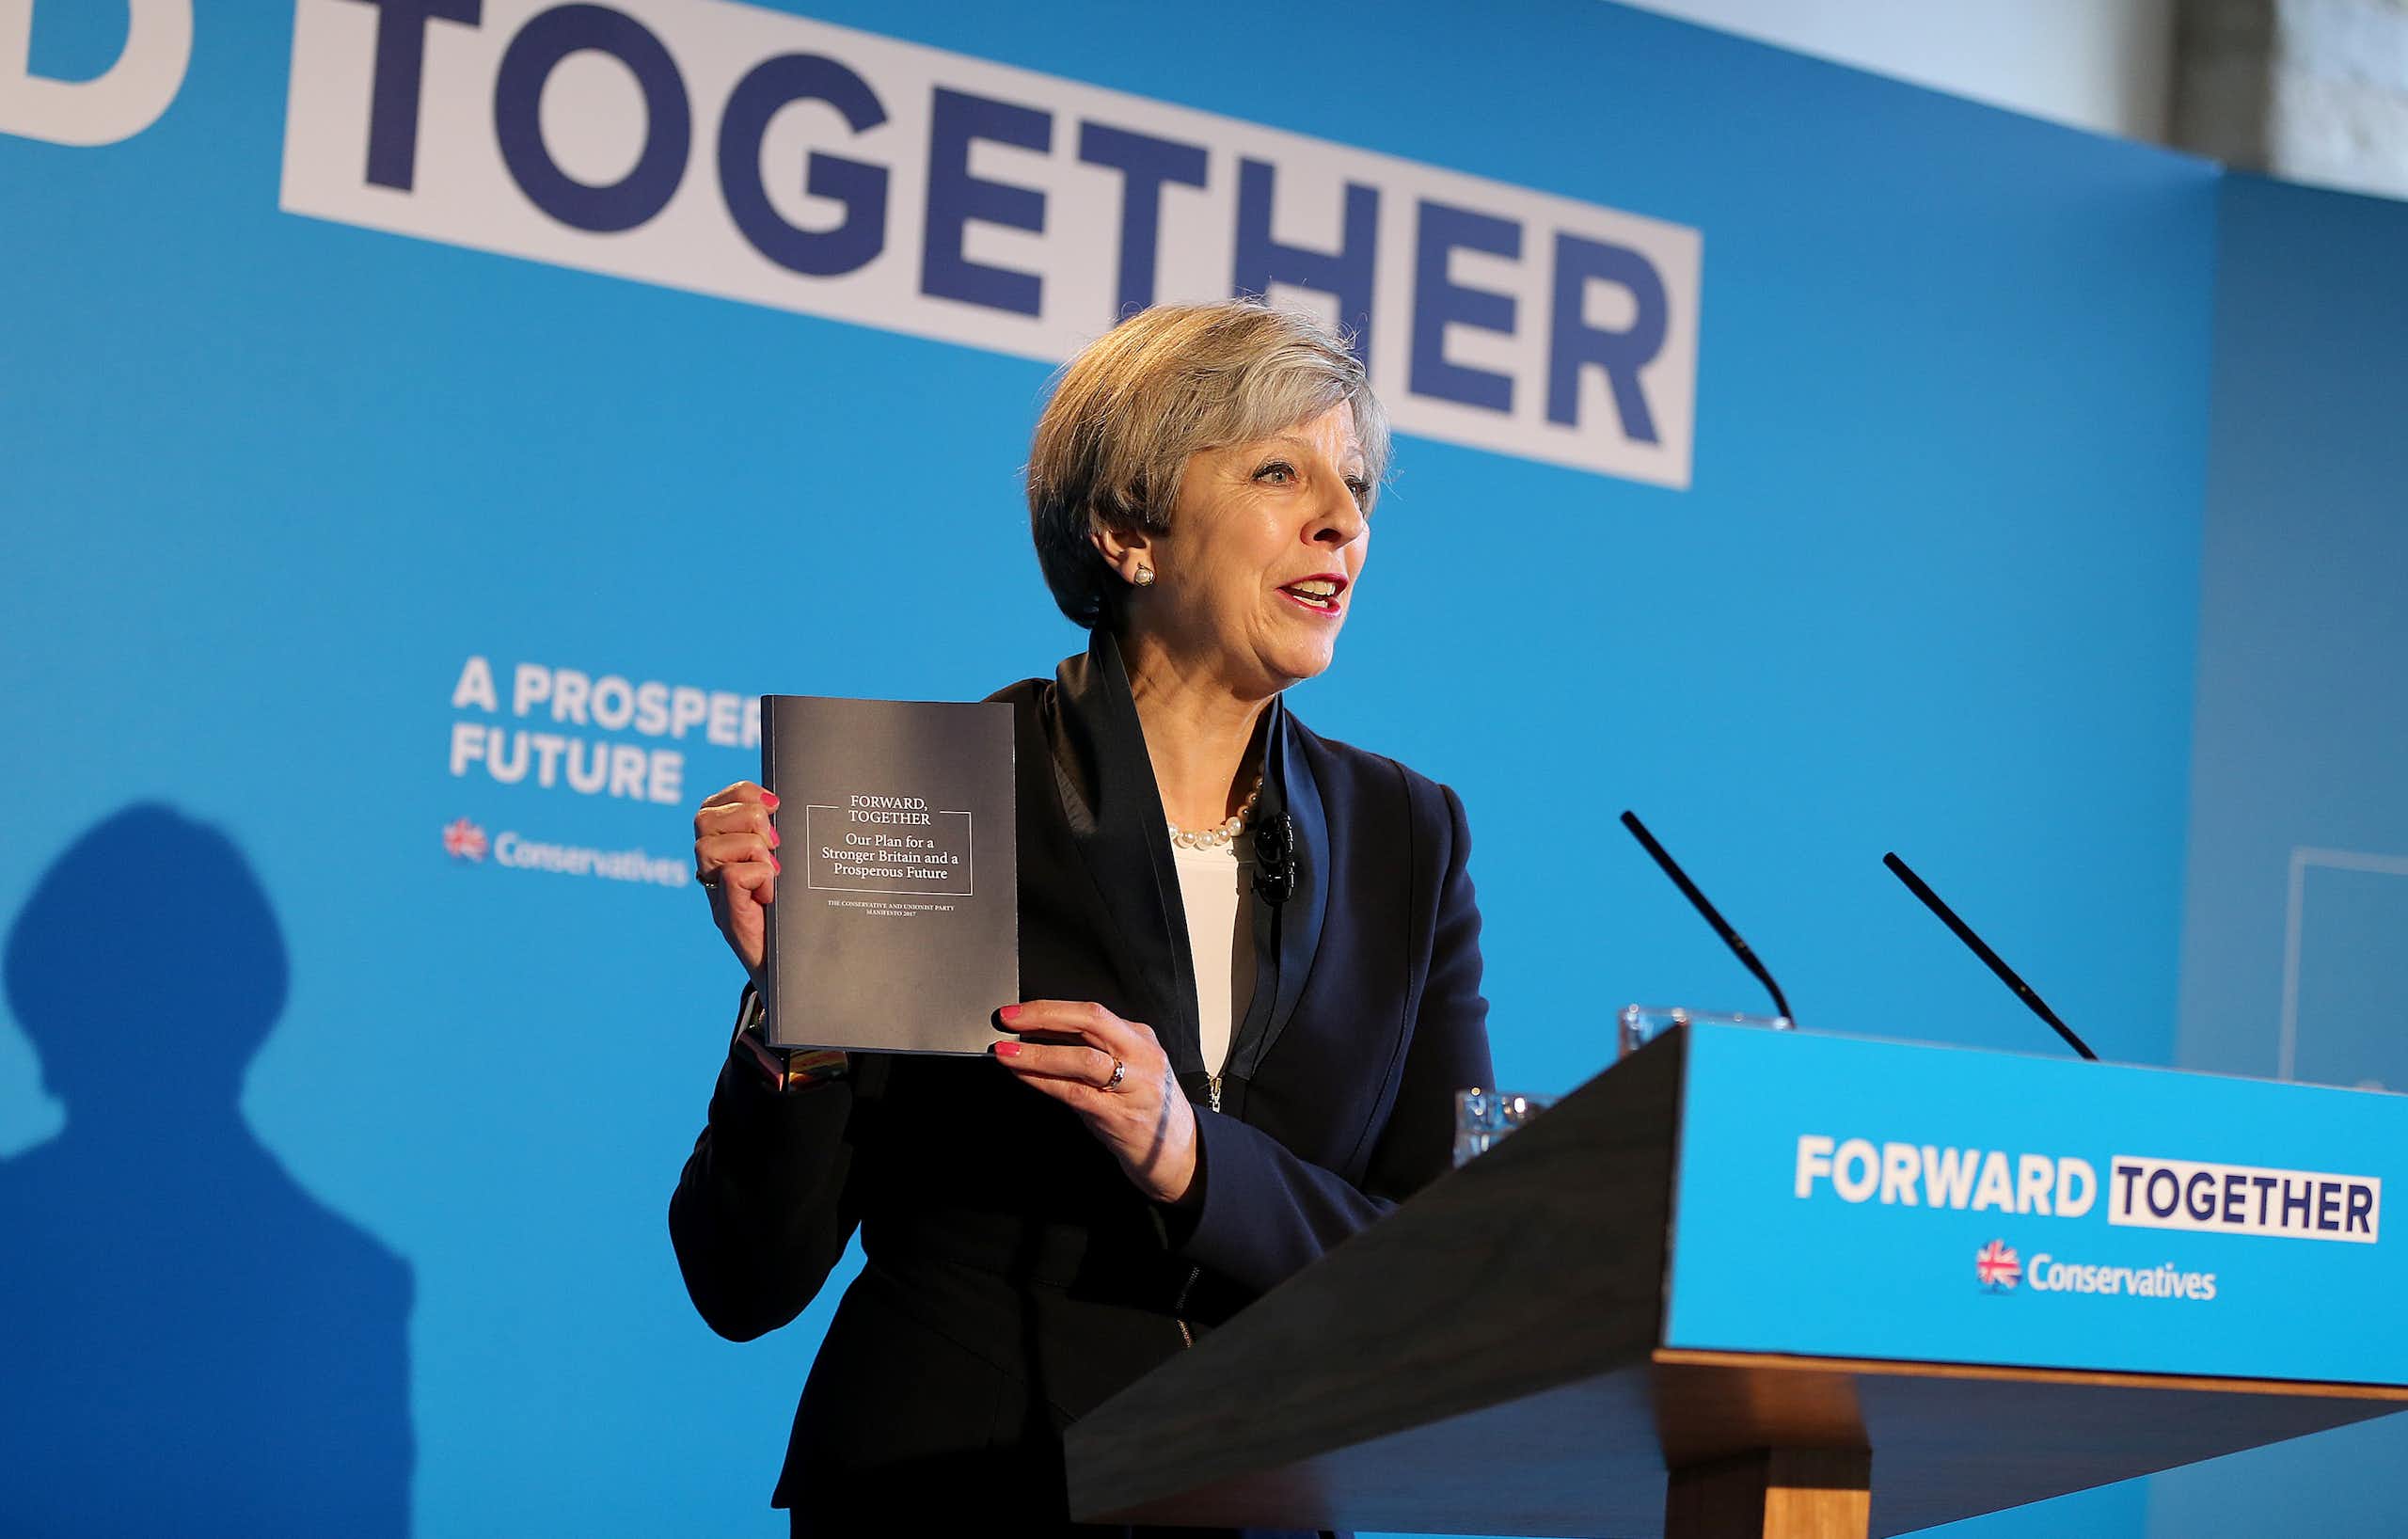 Theresa May, standing at a blue podium reading 'forward together', holds up a copy of the 2017 Conservative manifesto